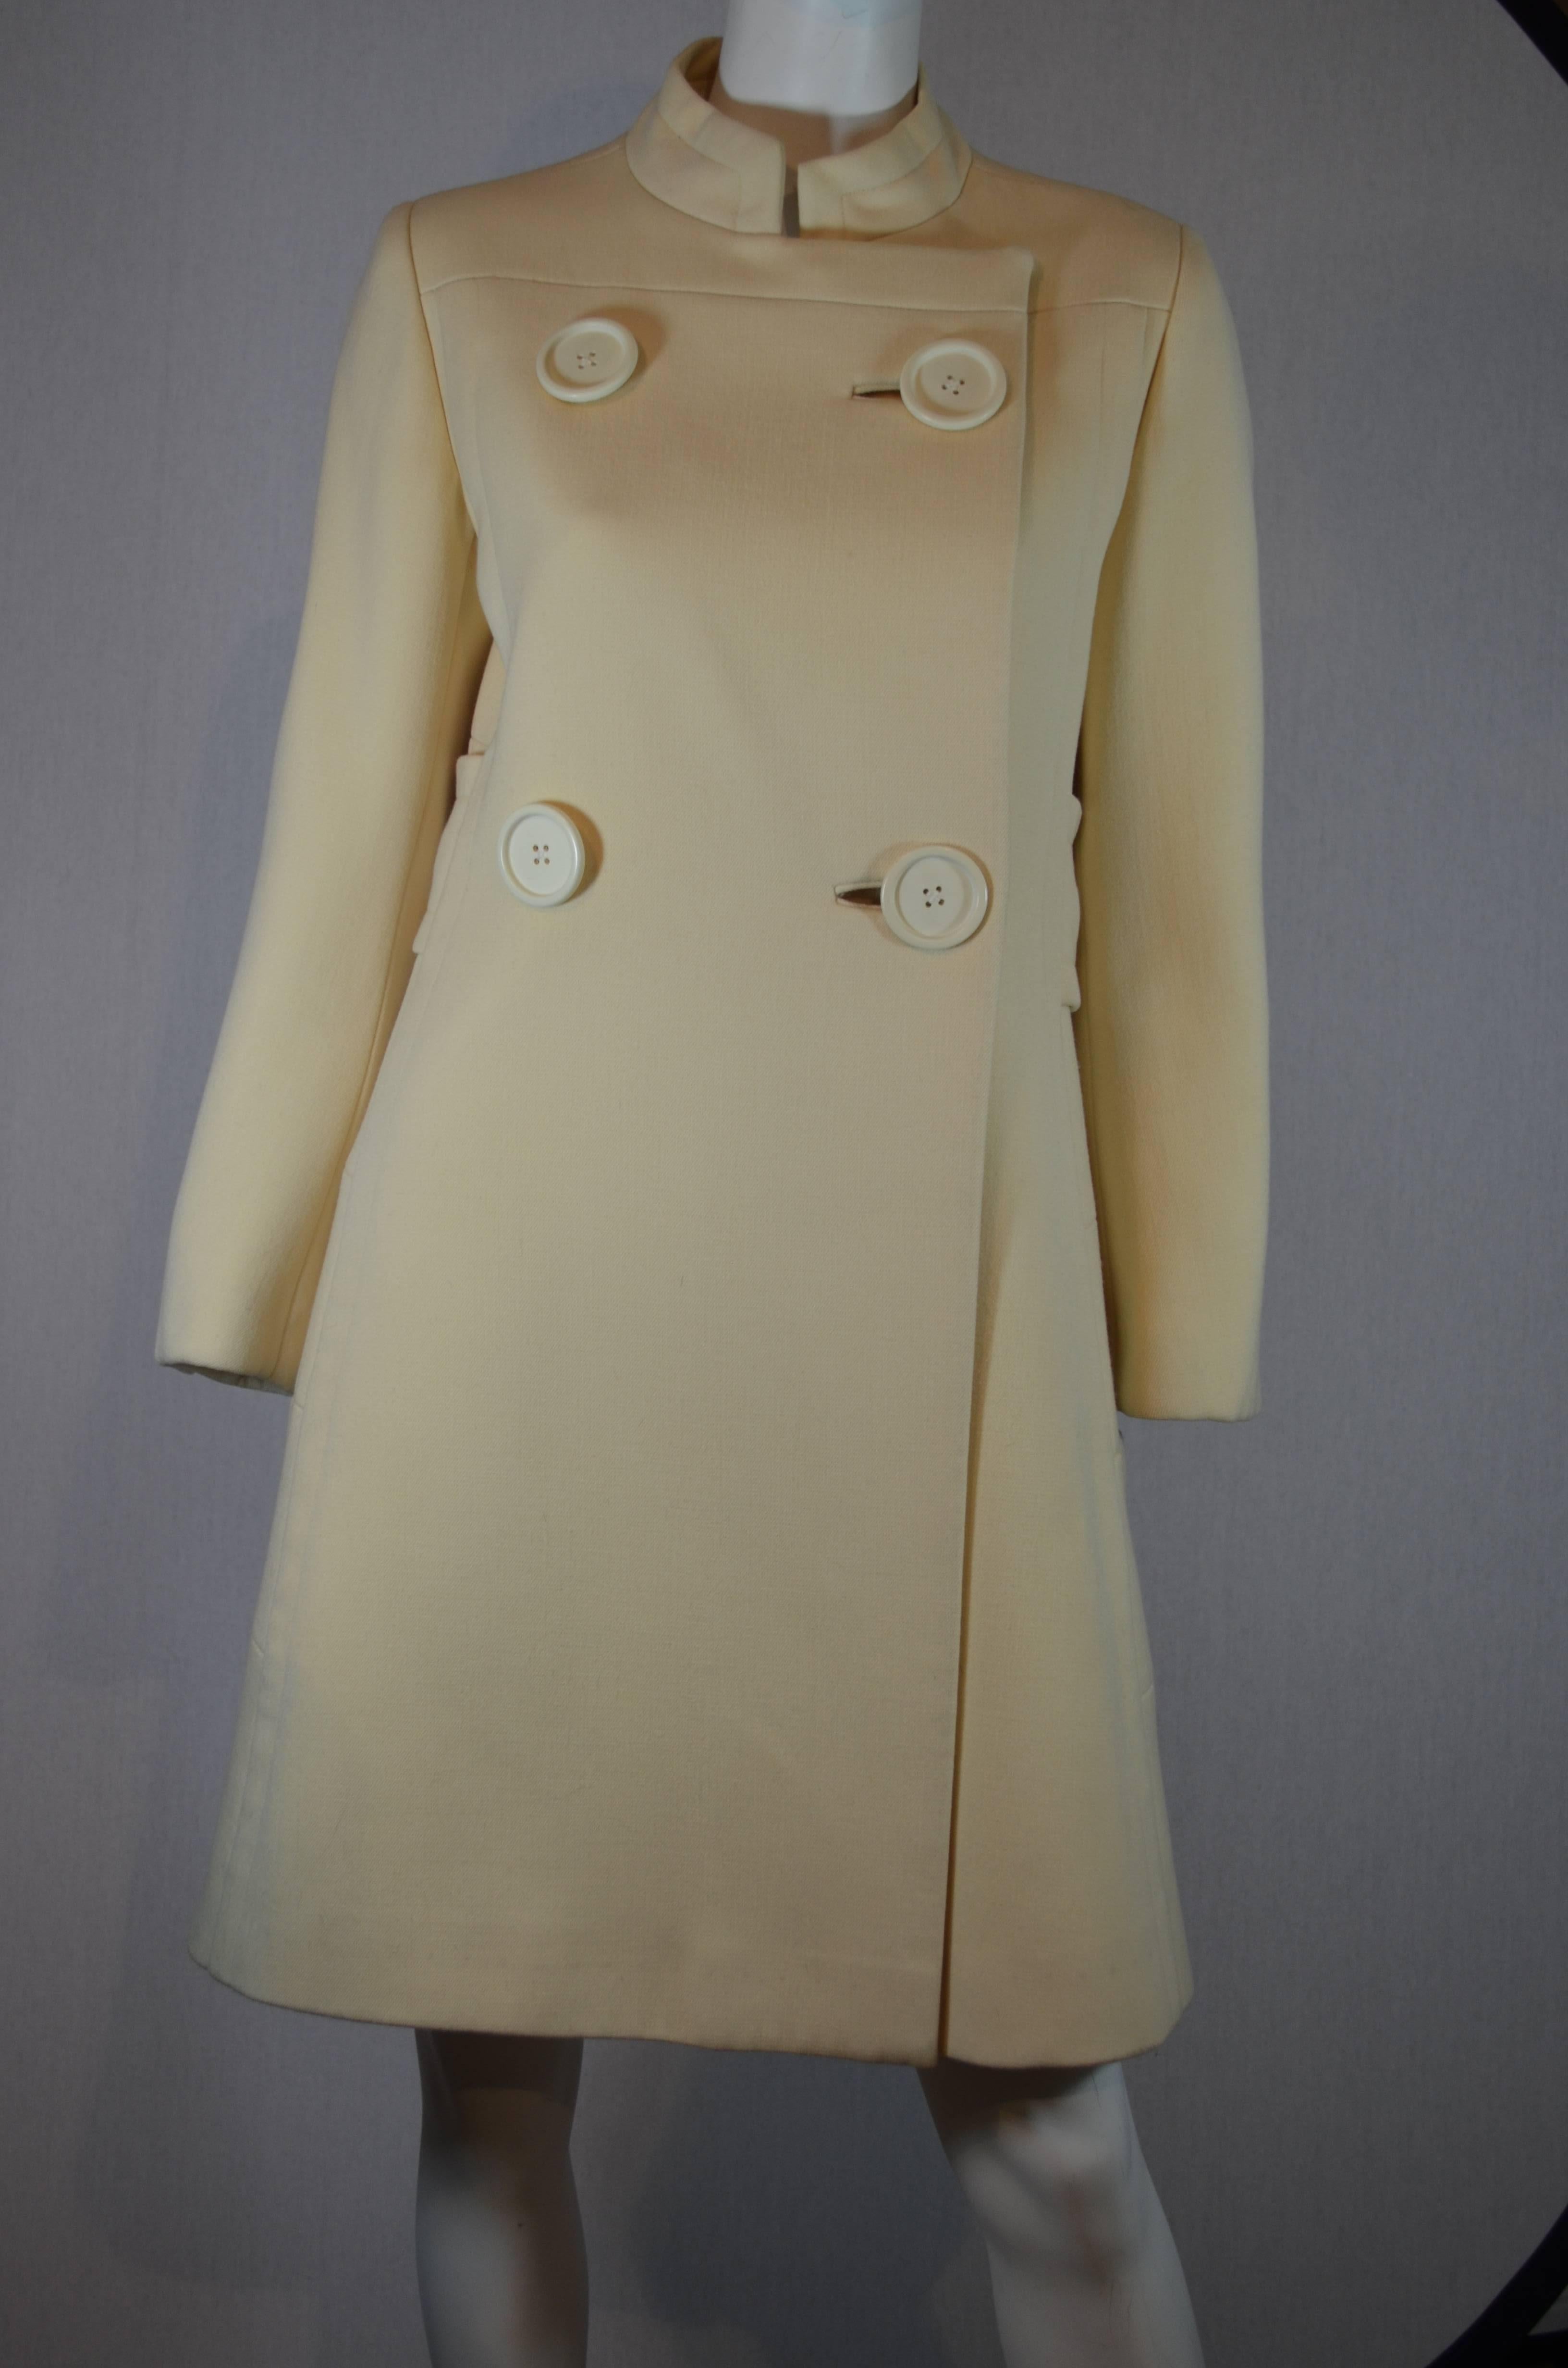 1960's cream structured wool ladies proper coat with welted seams.  4 huge buttons, double breasted, mandarin collar, fully lined.  It has a faux belted back.  It has two front pockets at hips and fully lined.  

Condition:  Excellent vintage